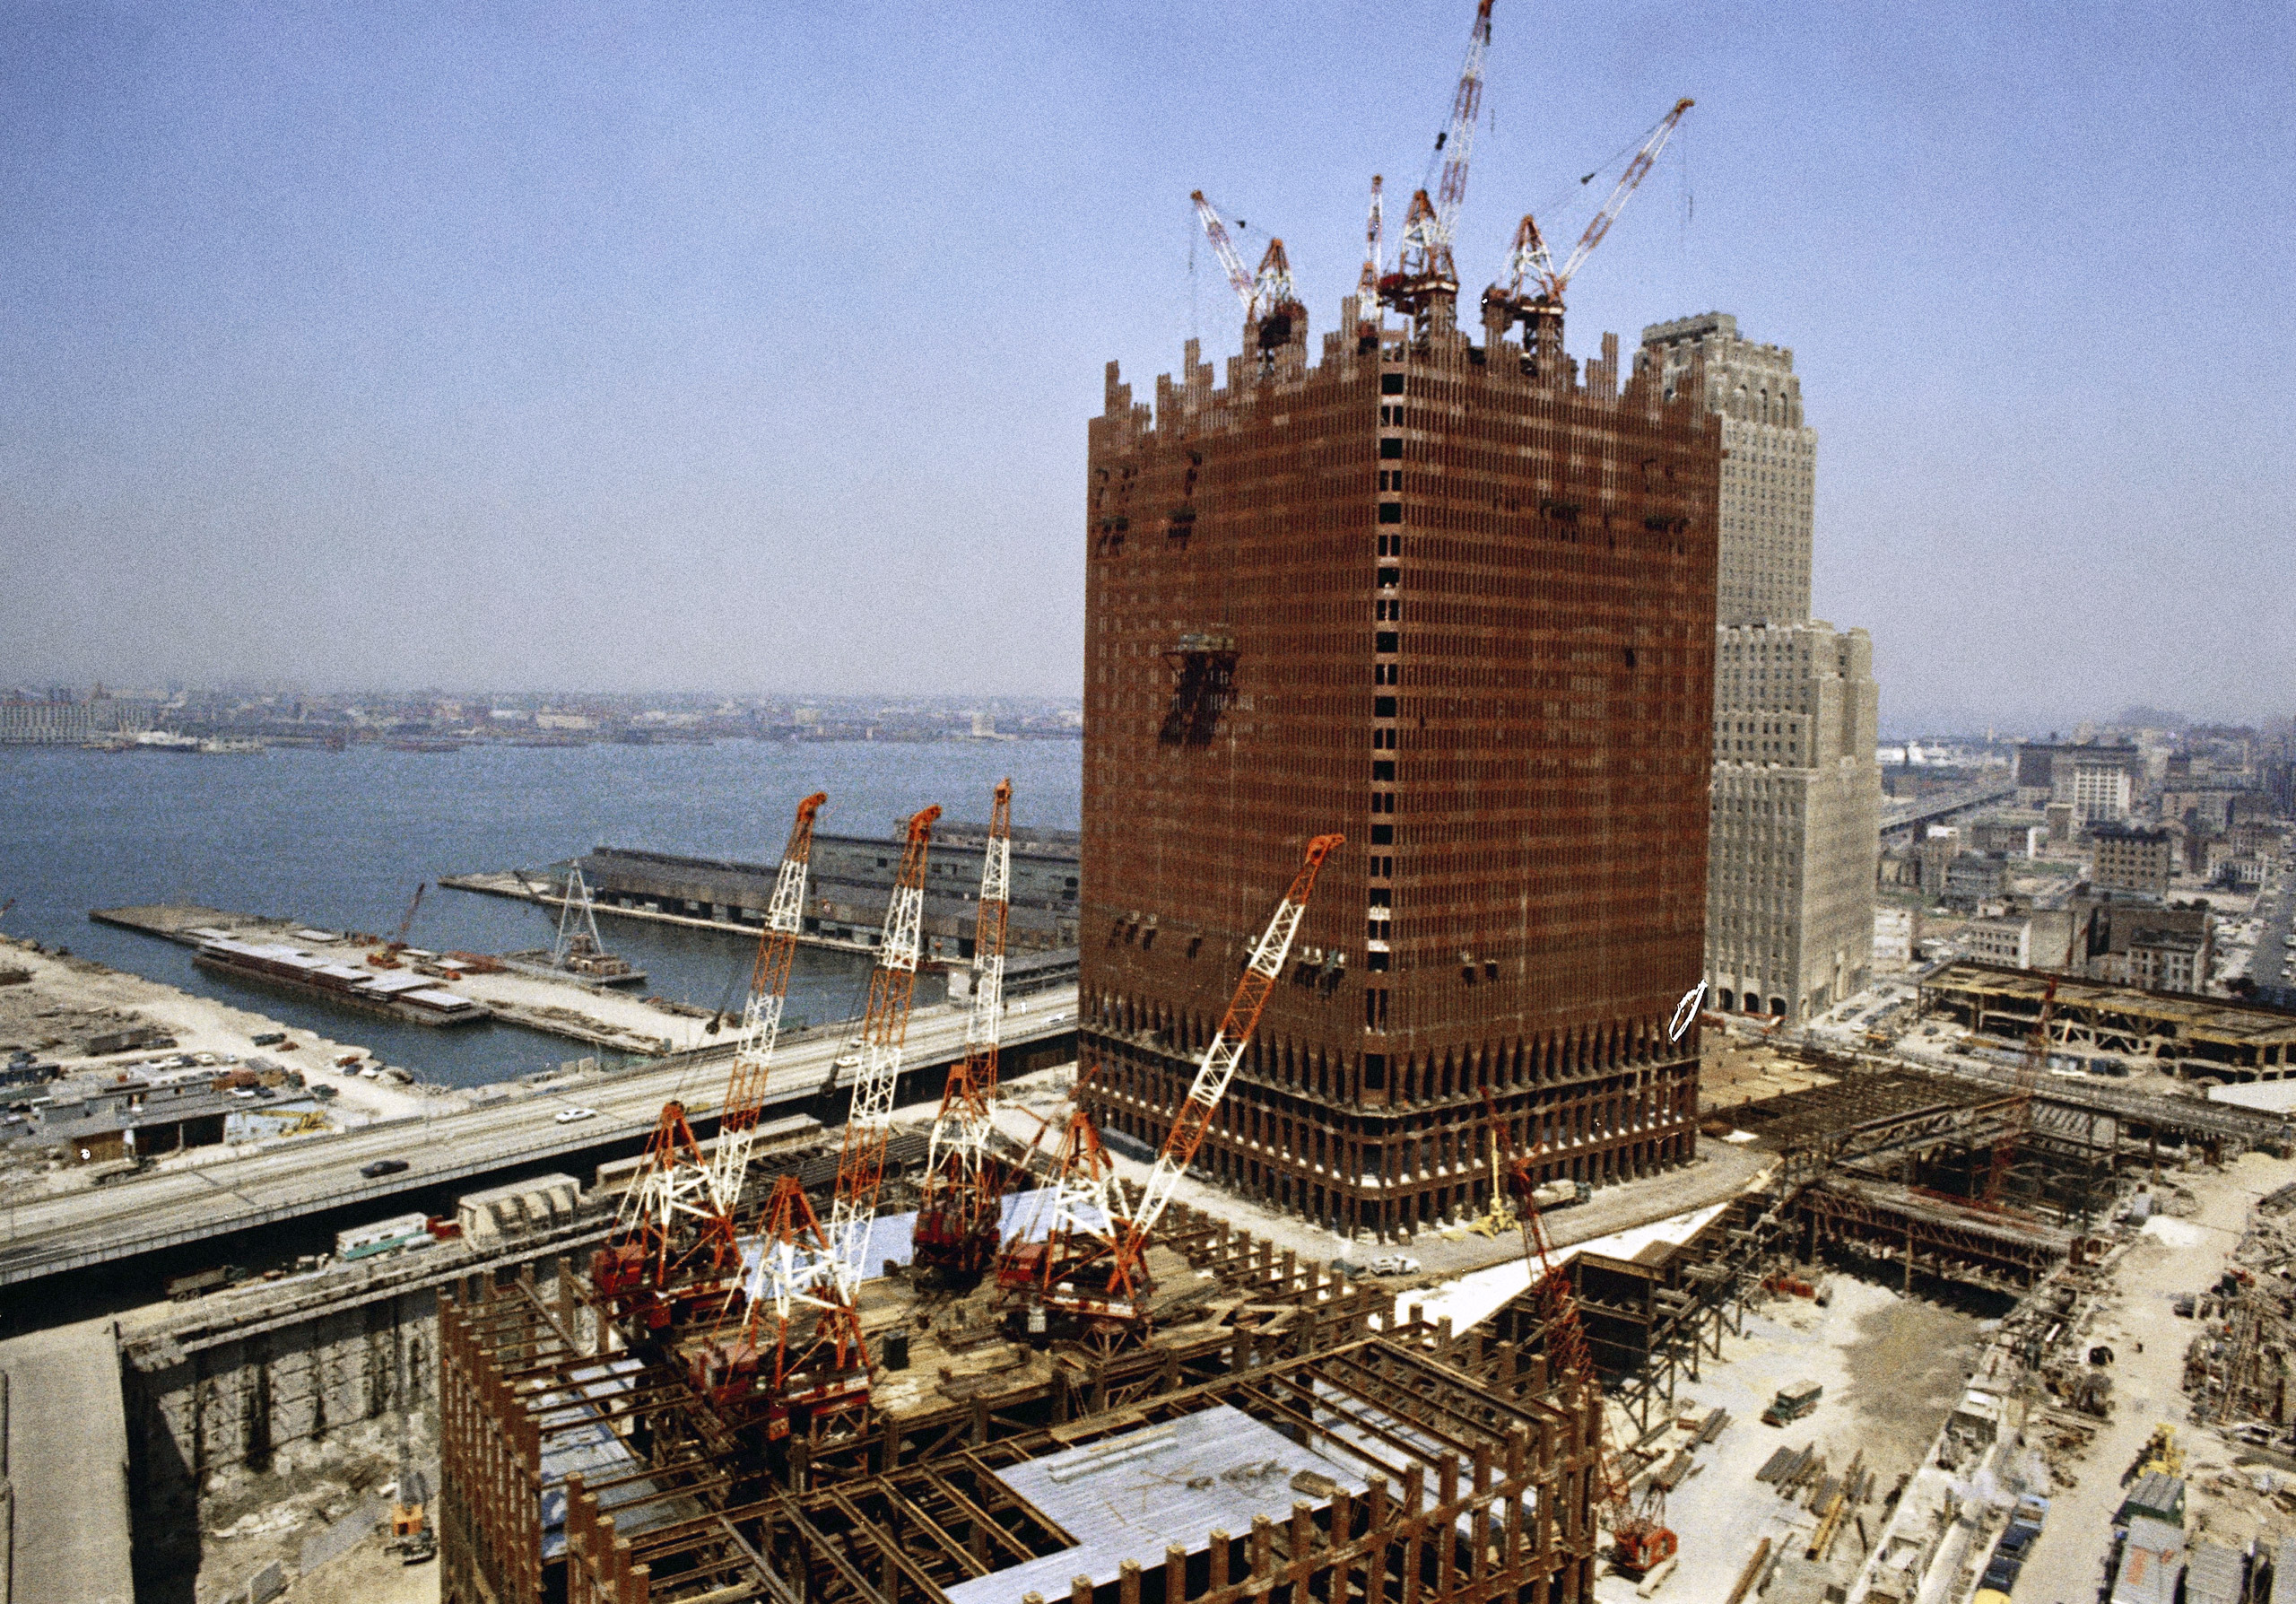 The new World Trade Center is shown under construction in New York City, August 1969.